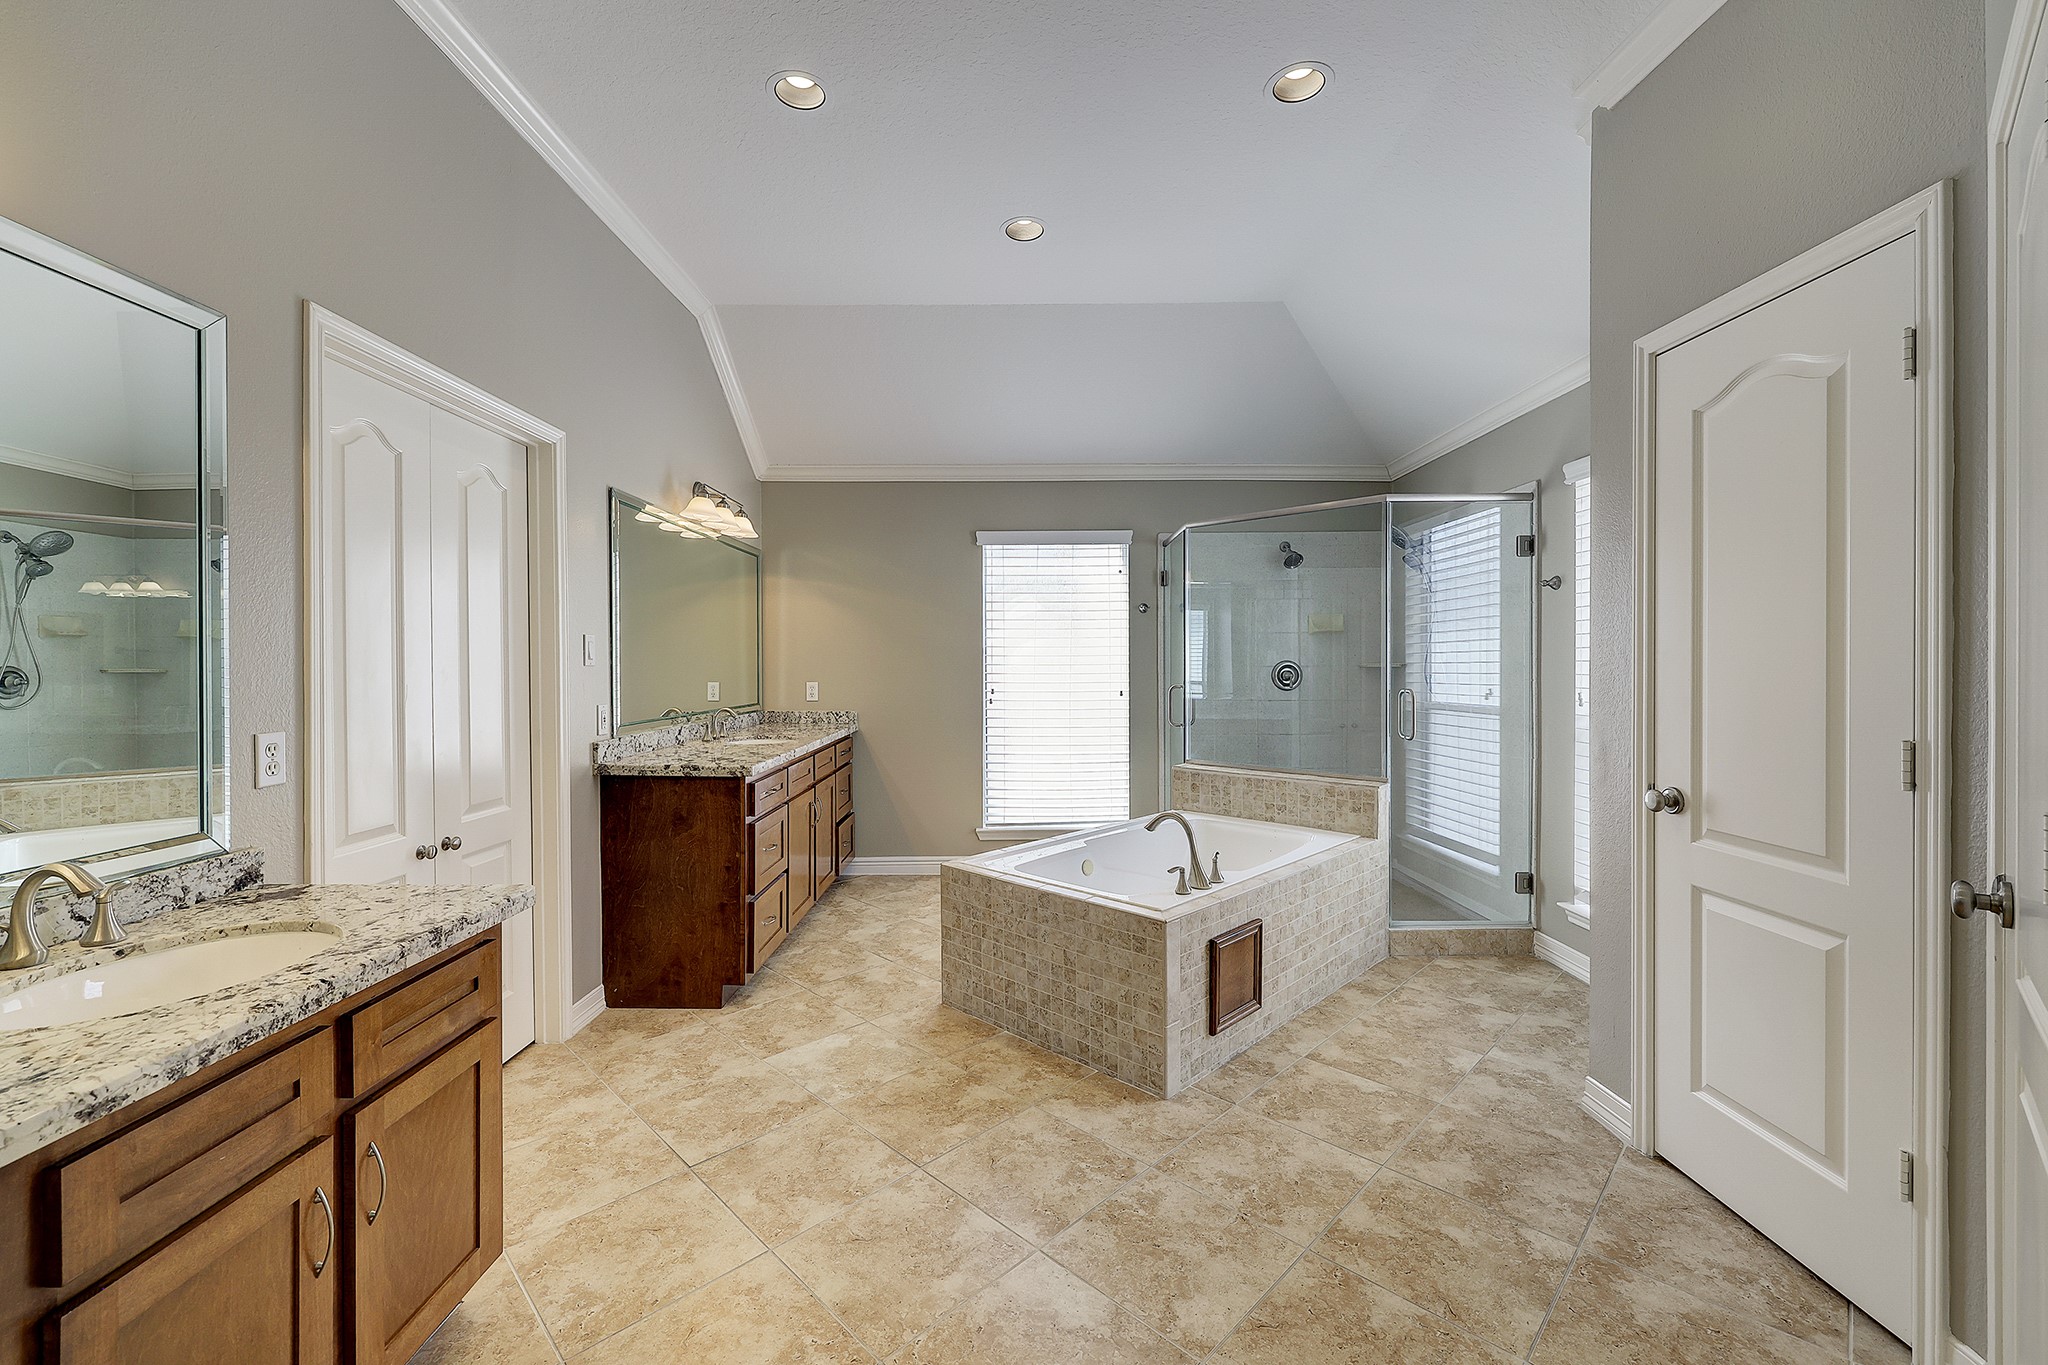 Spacious primary bathroom featuring a generous walk-in shower, jetted tub, and a private enclosed commode